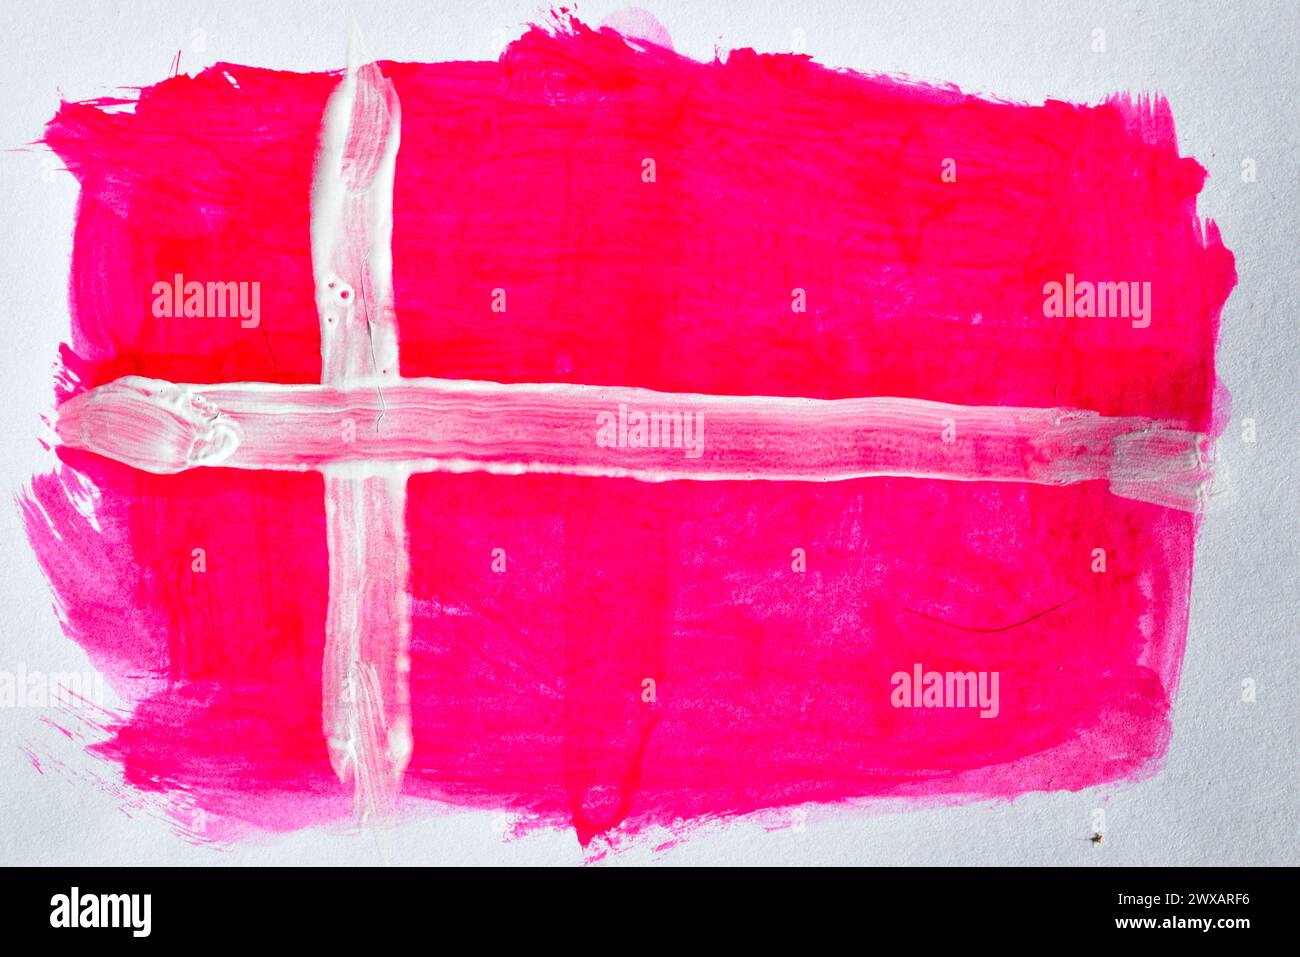 White cross on red painted with watercolors on a white background similar to the flag of Denmark. Stock Photo